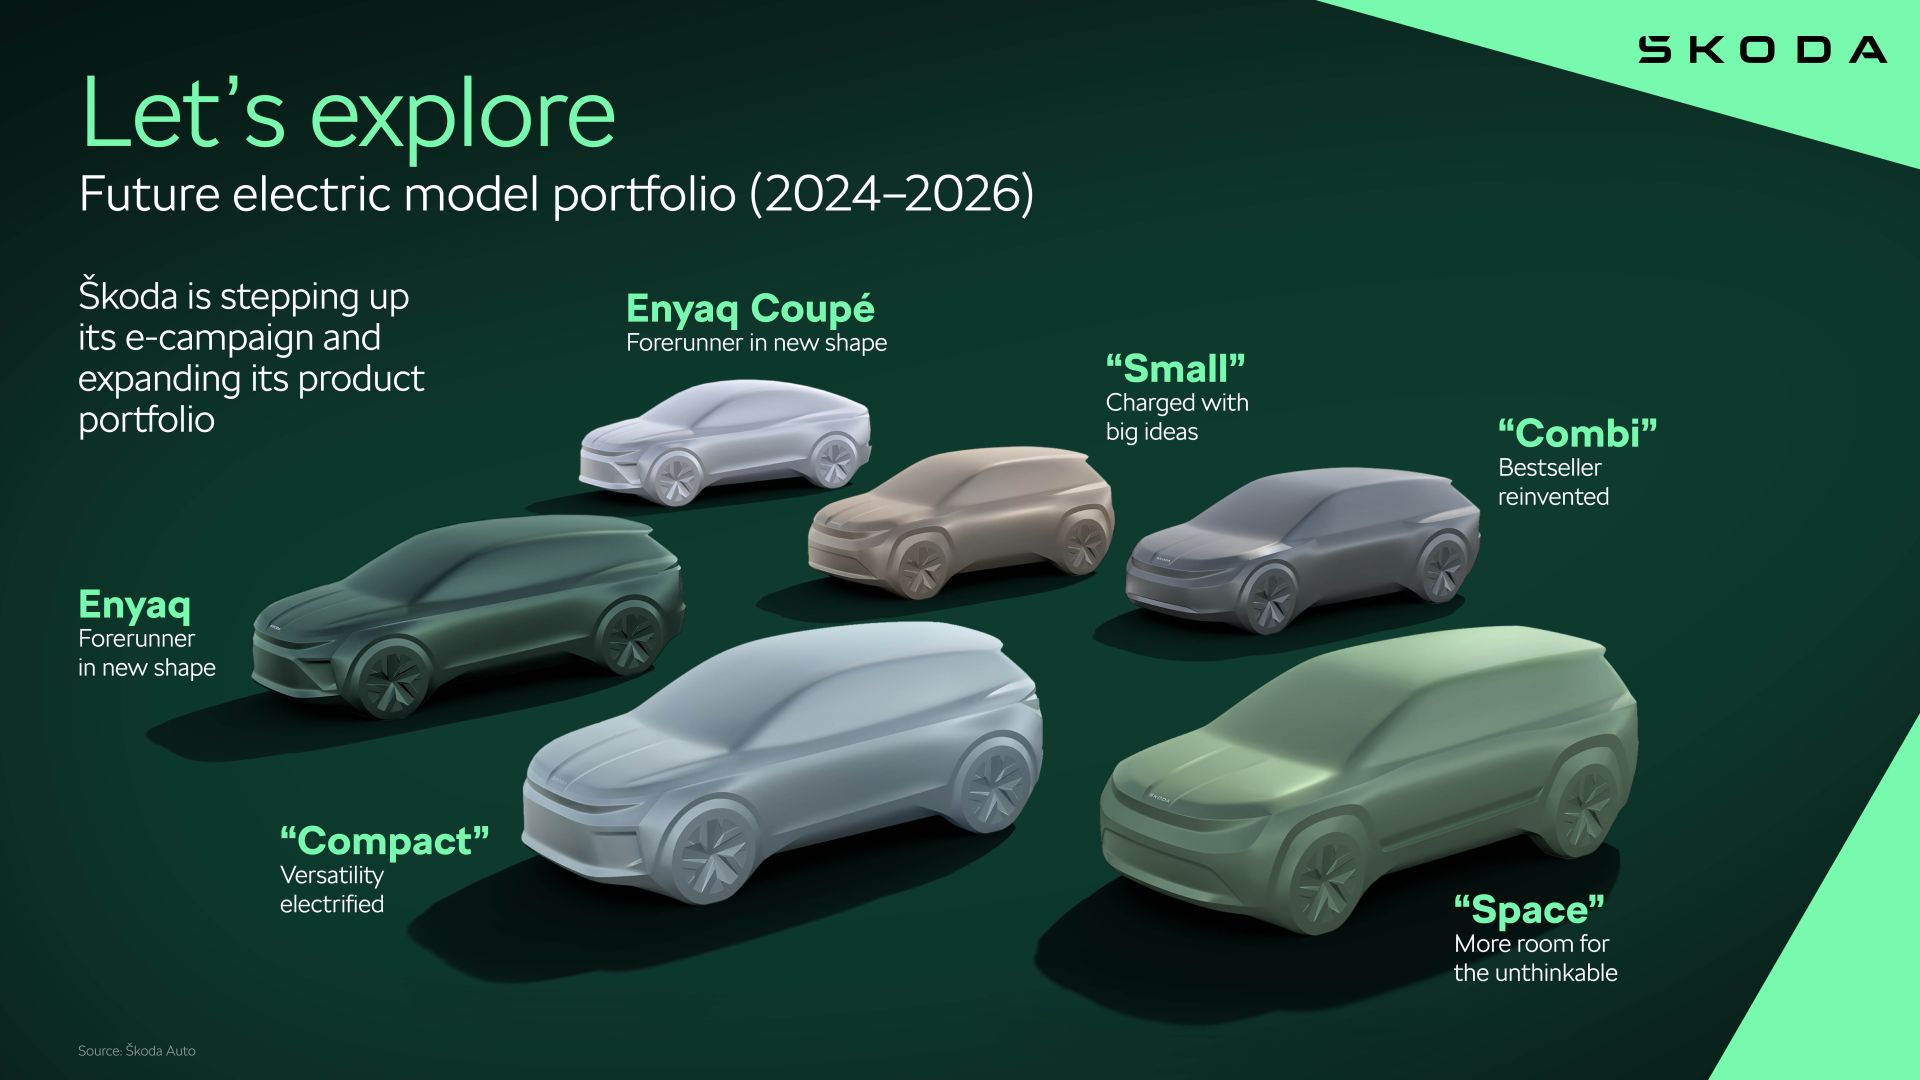 Skoda Confirms Four New Electric Models by 2026 - autoevolution